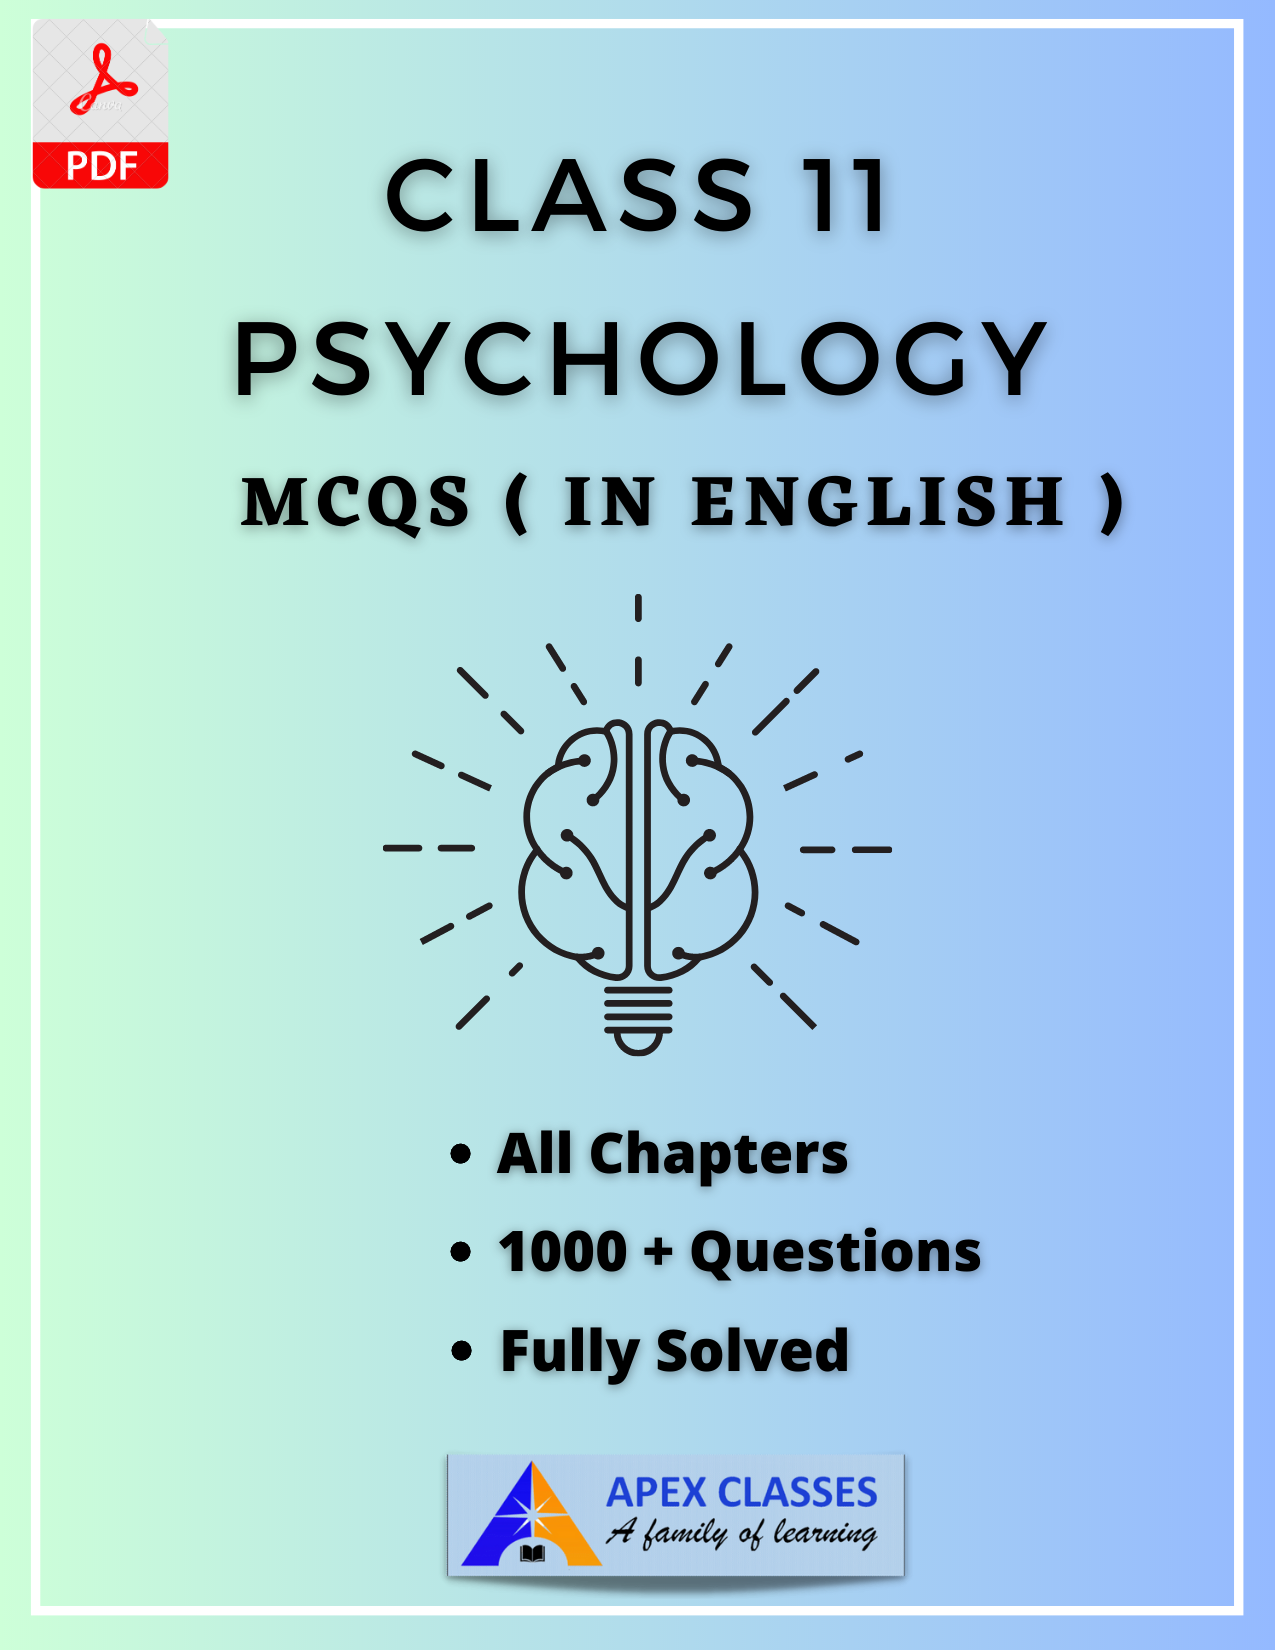 NCERT Class 11 Psychology MCQs all Chapters in English PDF